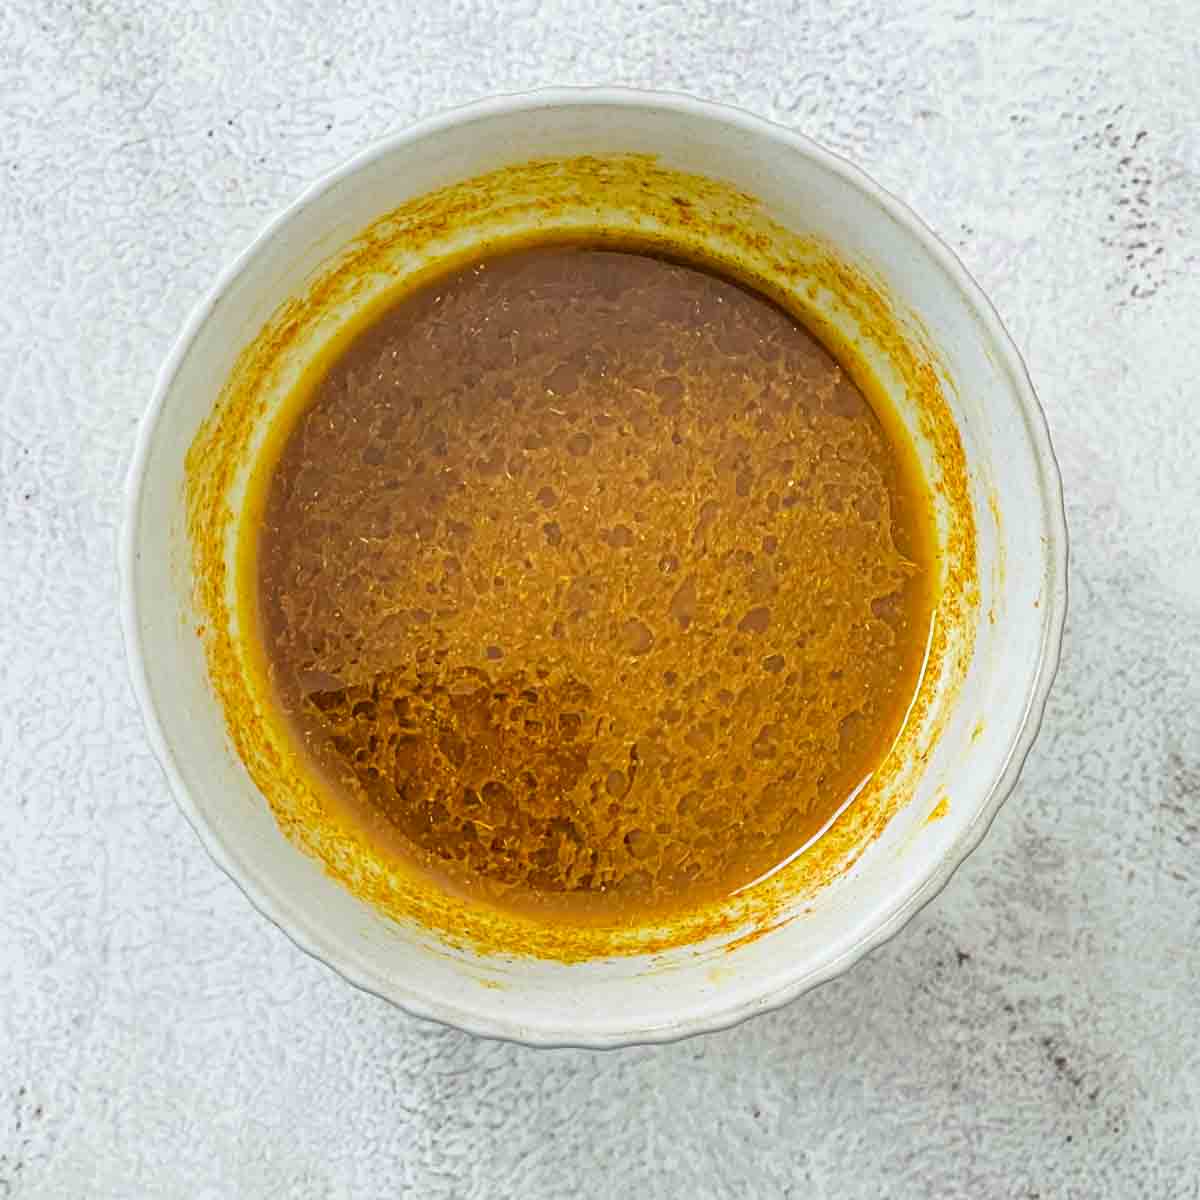 Salad dressing in a small bowl.